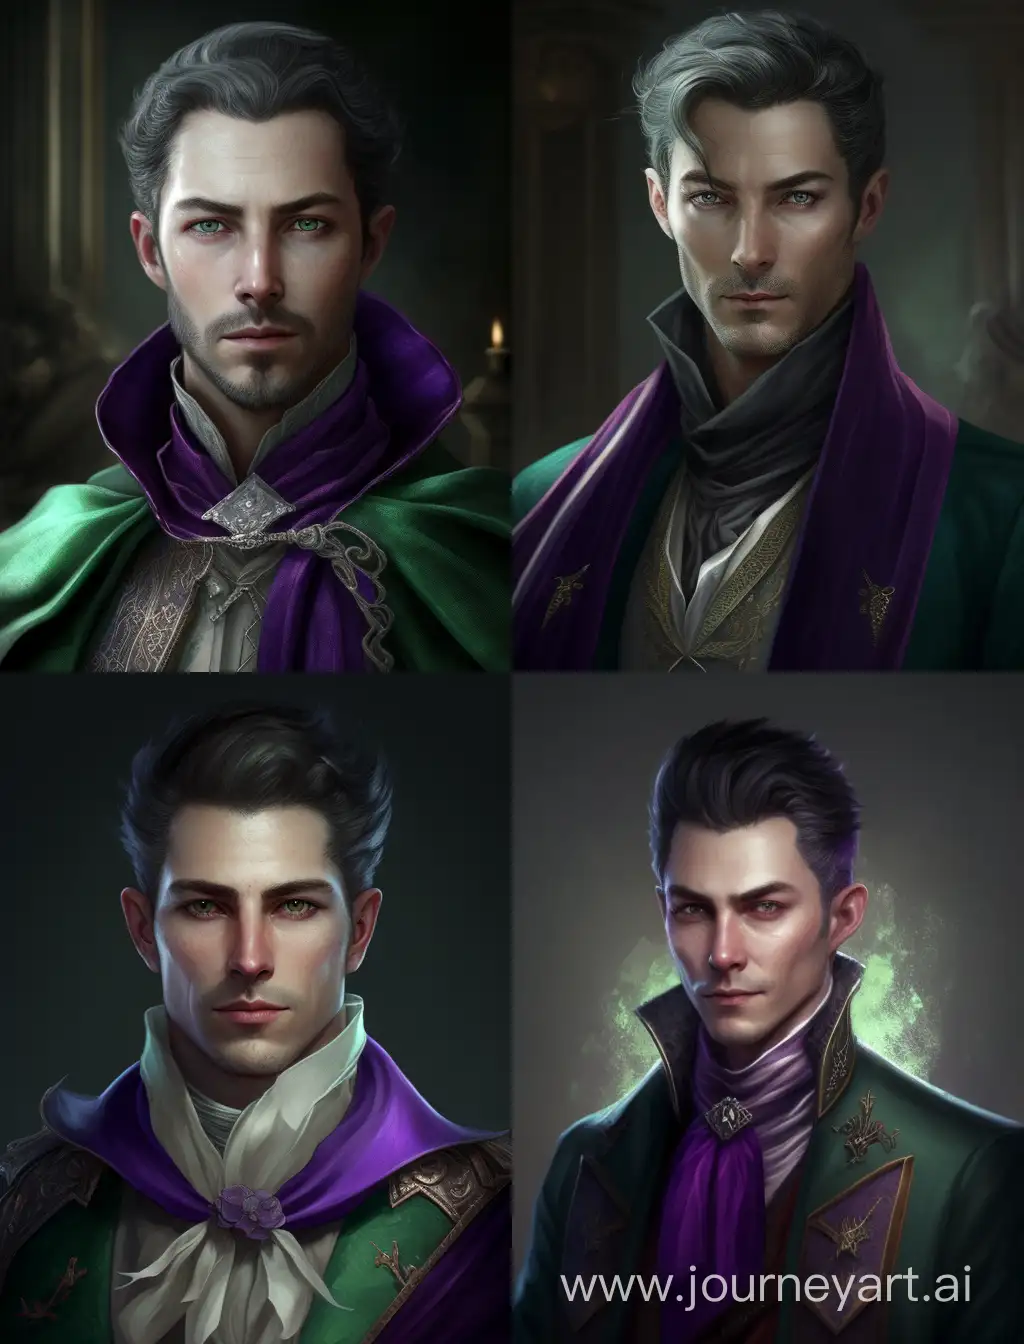 Renaissance-Mage-in-Regal-Attire-with-Intimidating-Green-Eyes